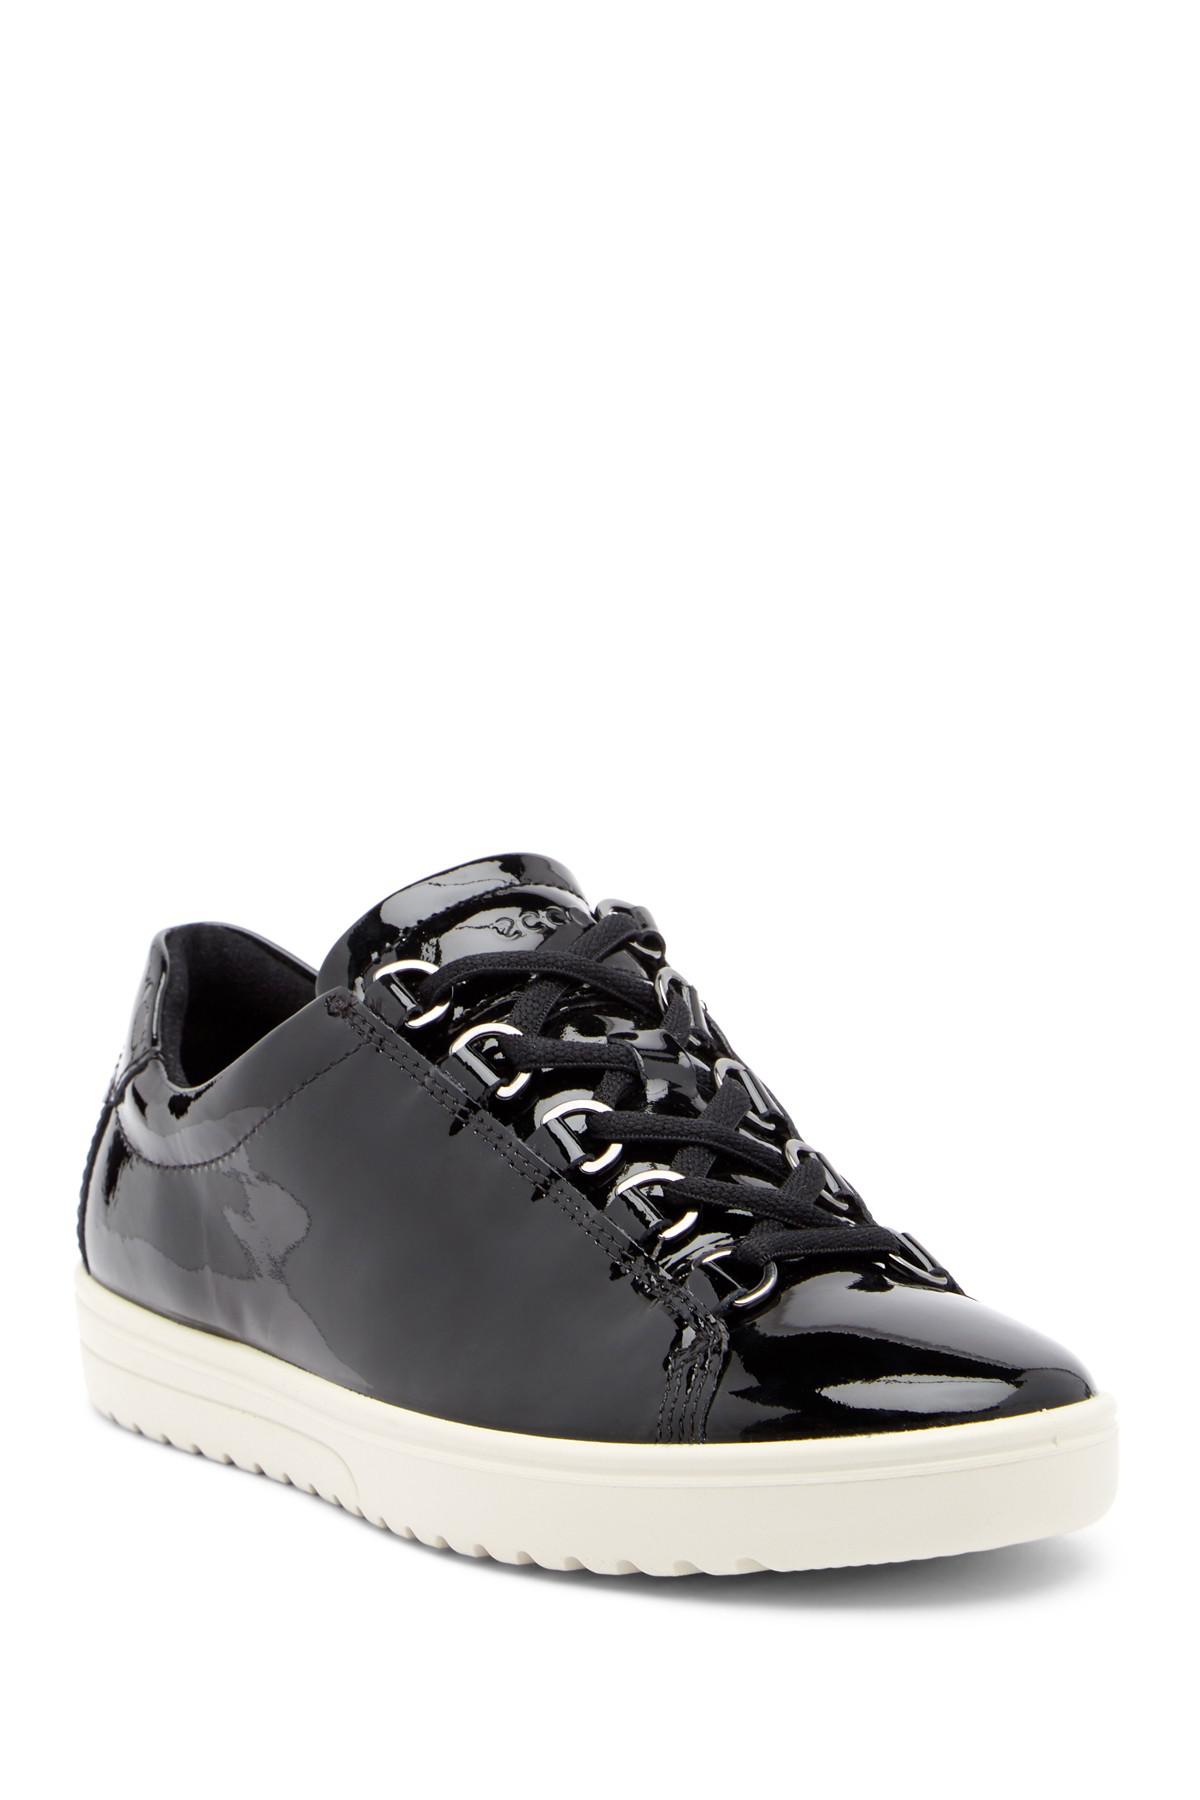 ecco patent leather shoes